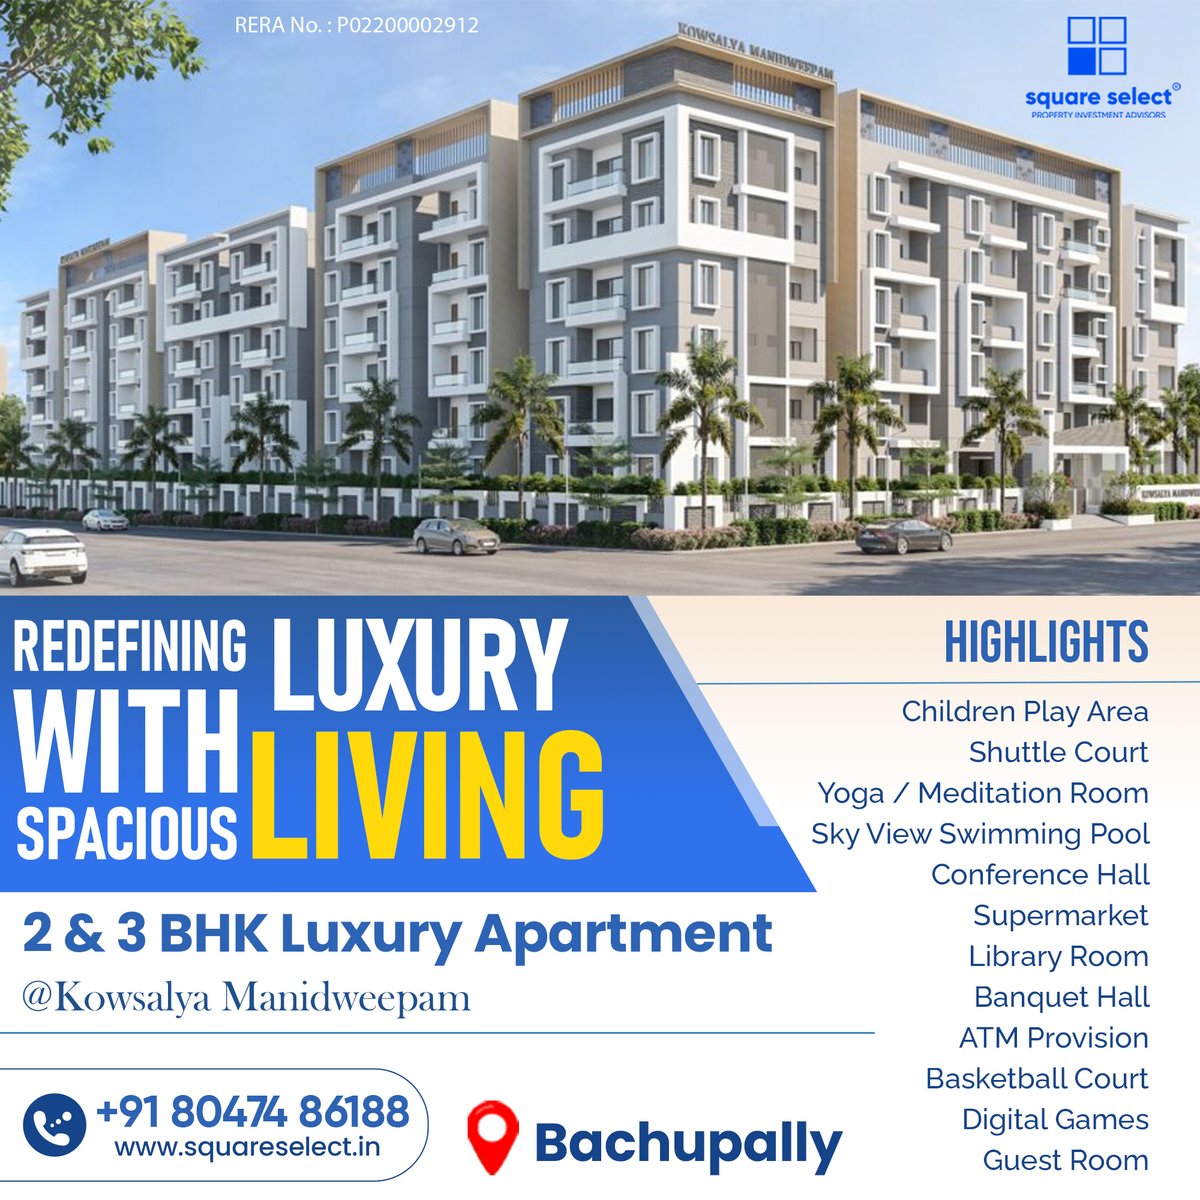 🏡 Discover Kowsalya Manidweepam - Luxury Apartments in Hyderabad's Prime Location! 2 & 3 BHK units, 2-car parking, and incredible amenities. Live your dream life!
#squareselect #KowsalyaManidweepam #HyderabadHomes #LuxuryLiving #DreamHome #RealEstate #BookNow